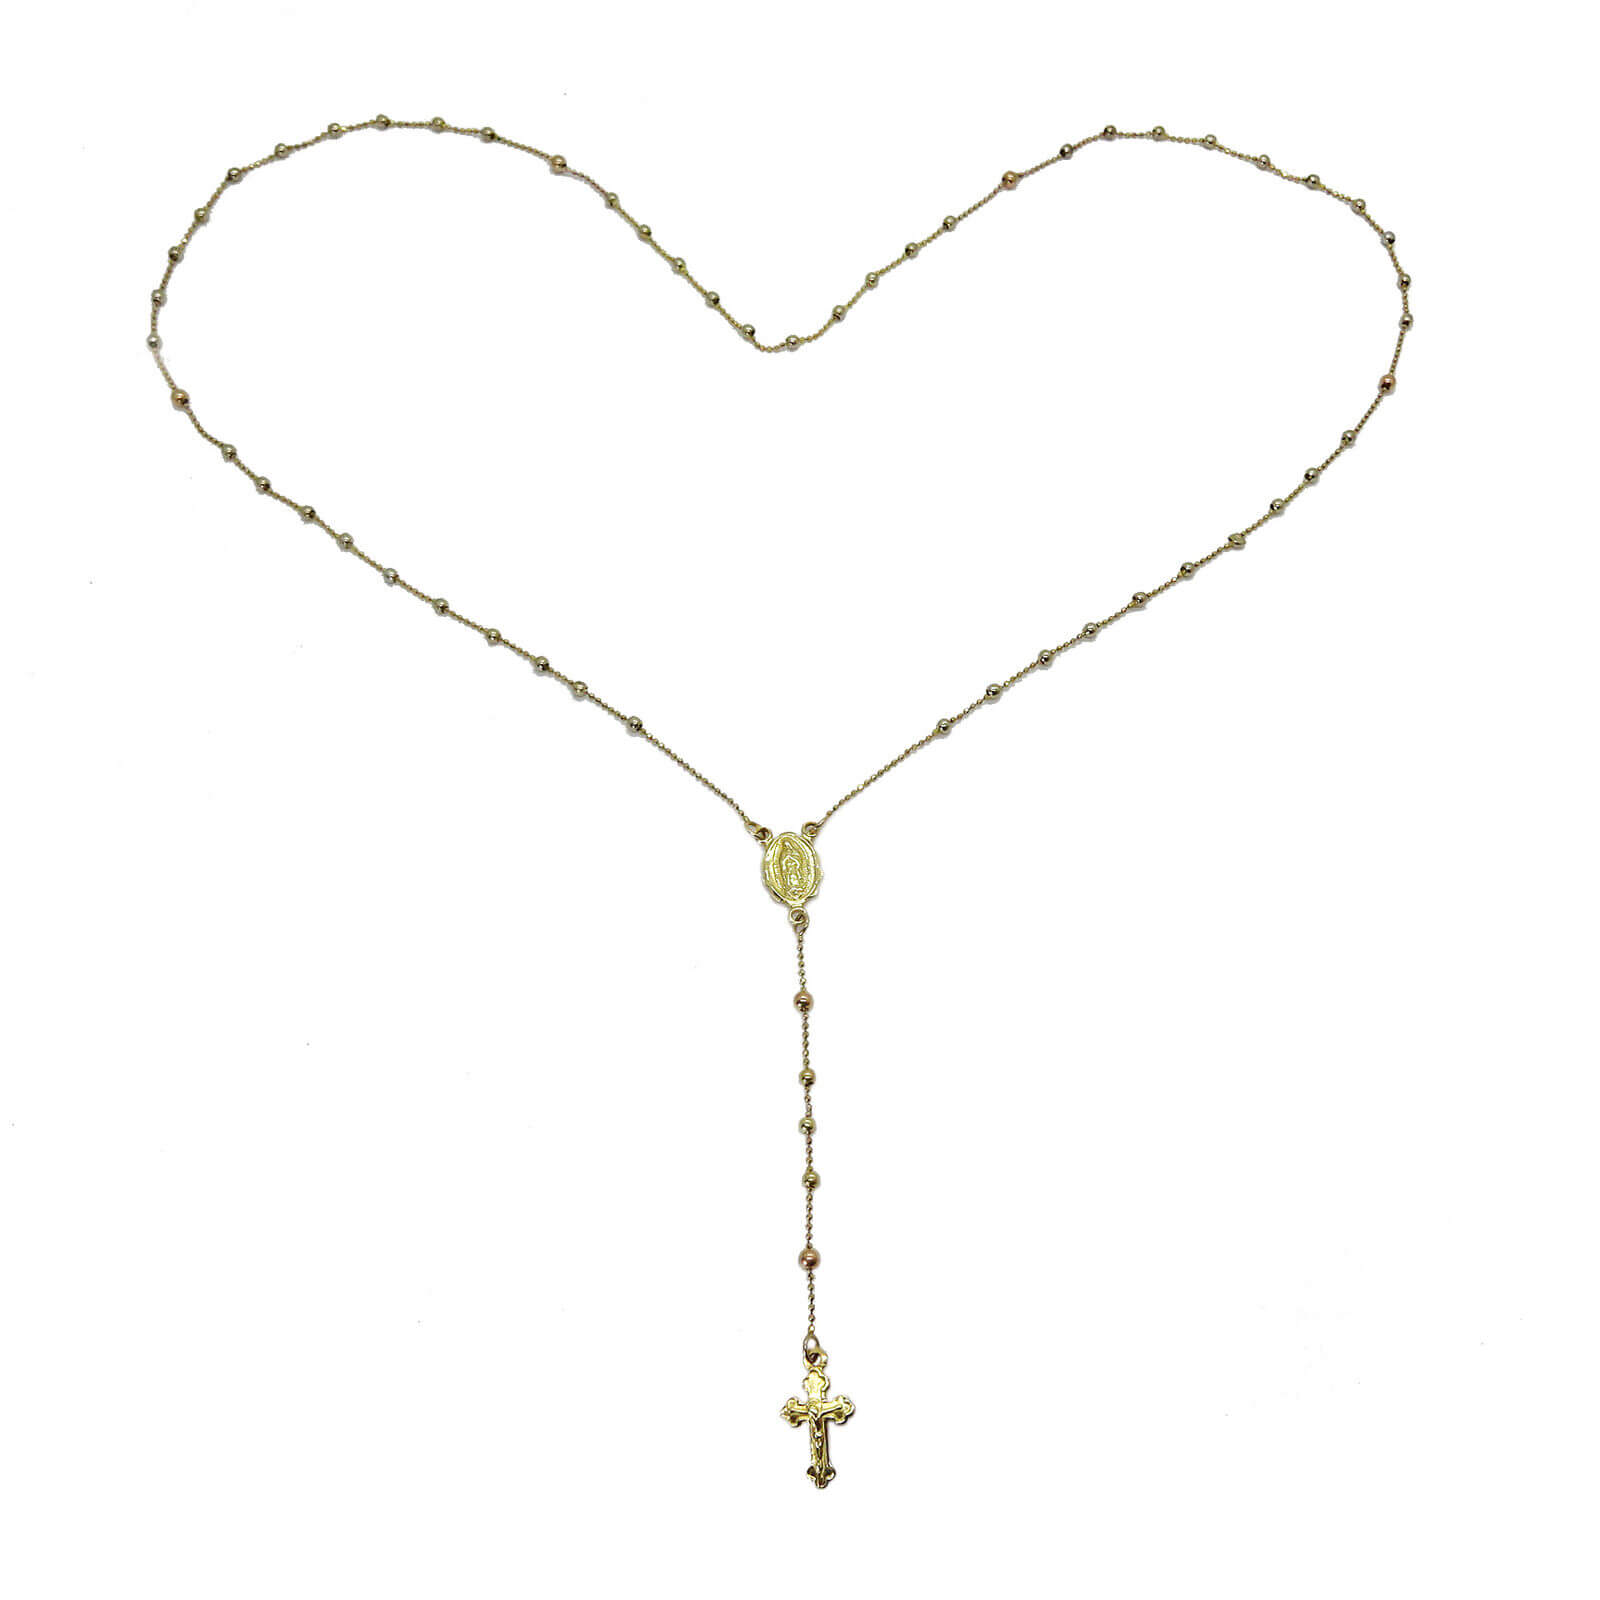 Buy Rosary Necklace 14k Yellow Gold Diamond Cut Beads 20 Inches 2.8mm  Online at SO ICY JEWELRY